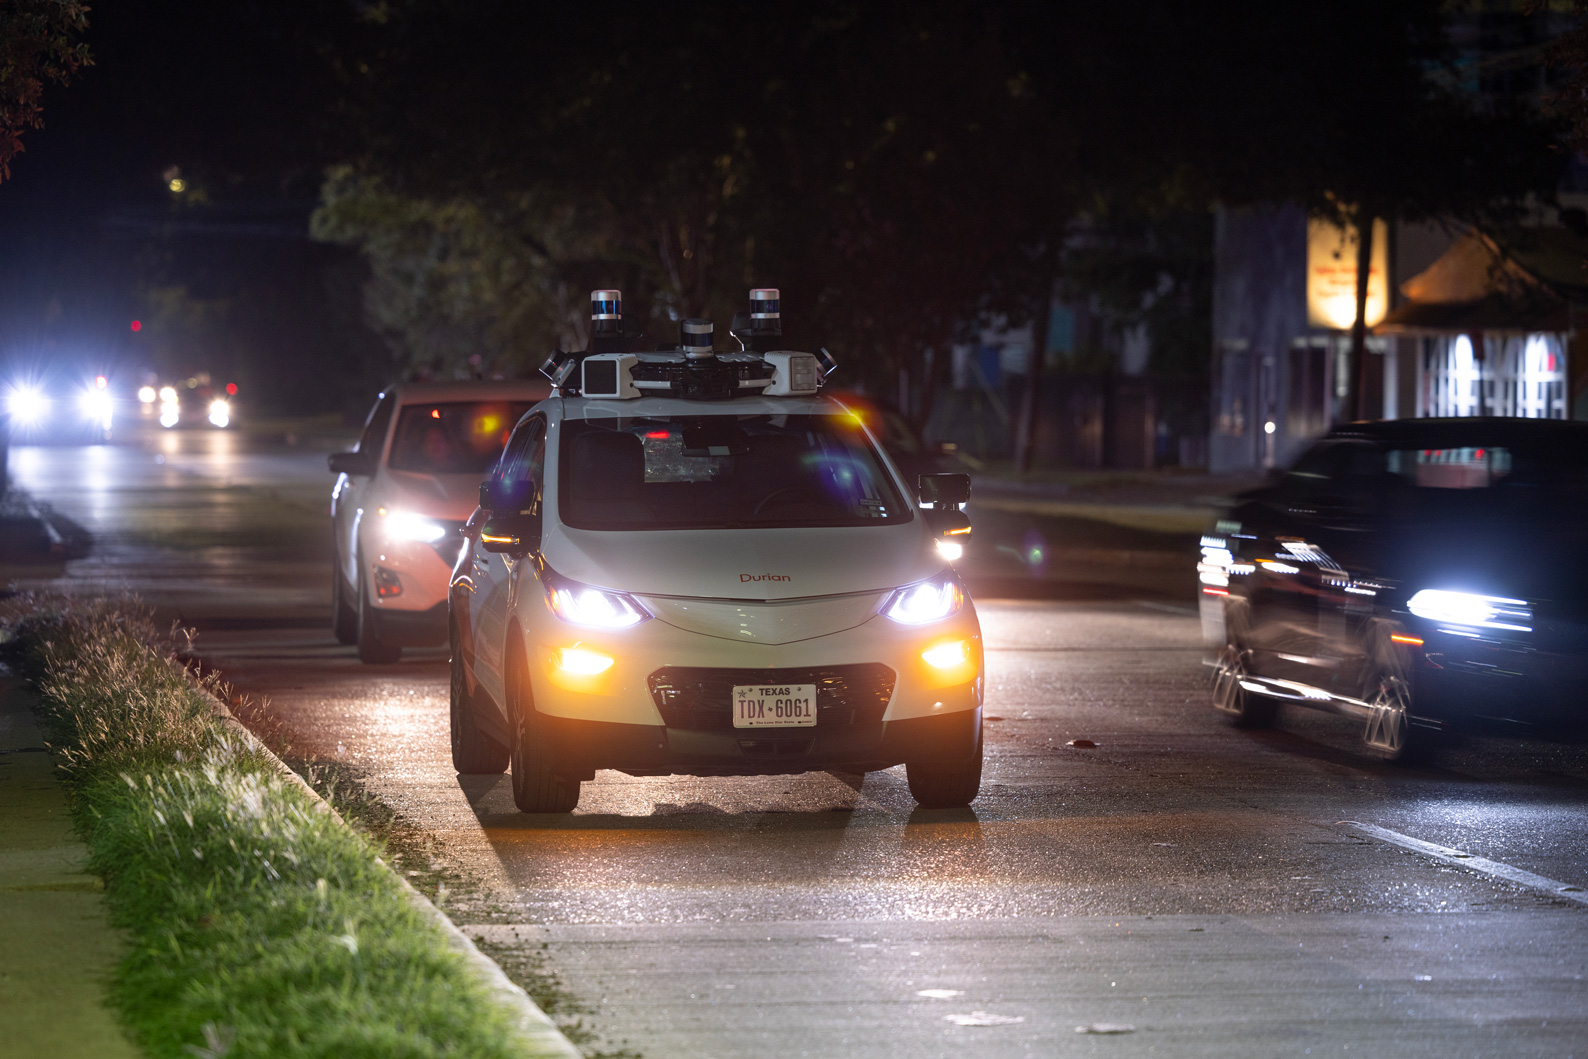 Cars pass by a Cruise vehicle as it waits on "pick-up standby" on Richmond Avenue in October in Houston